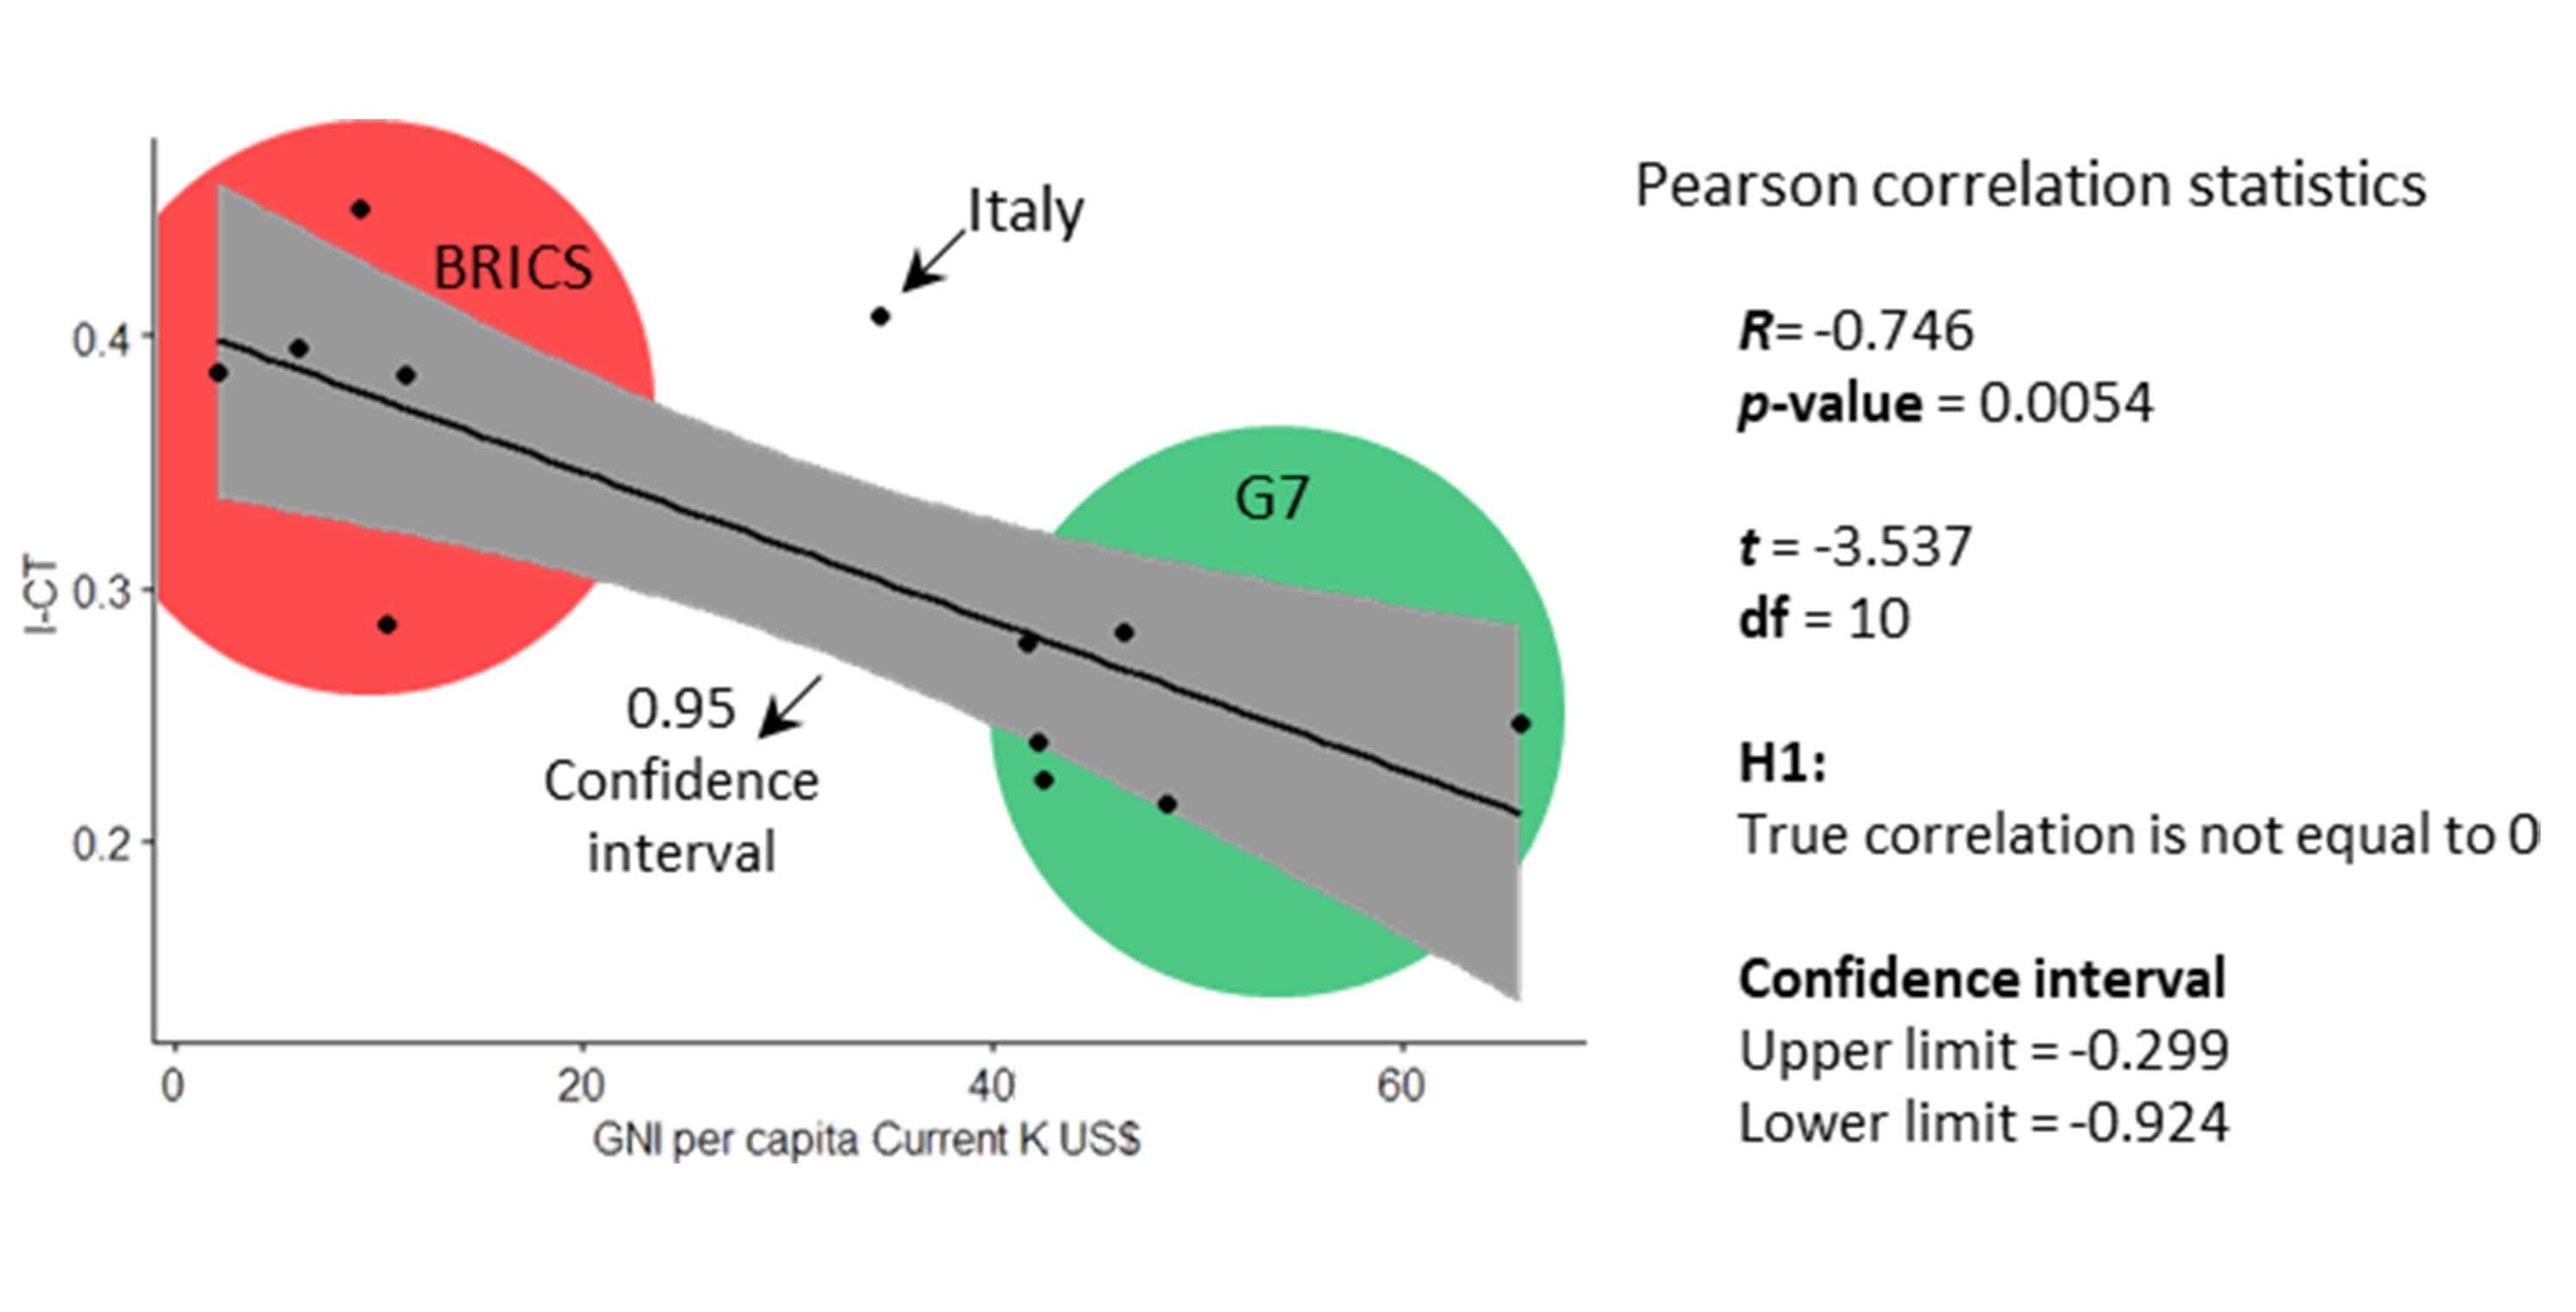 Evidence of the negative relationship between transaction costs and economic performance in G7+BRICS countries